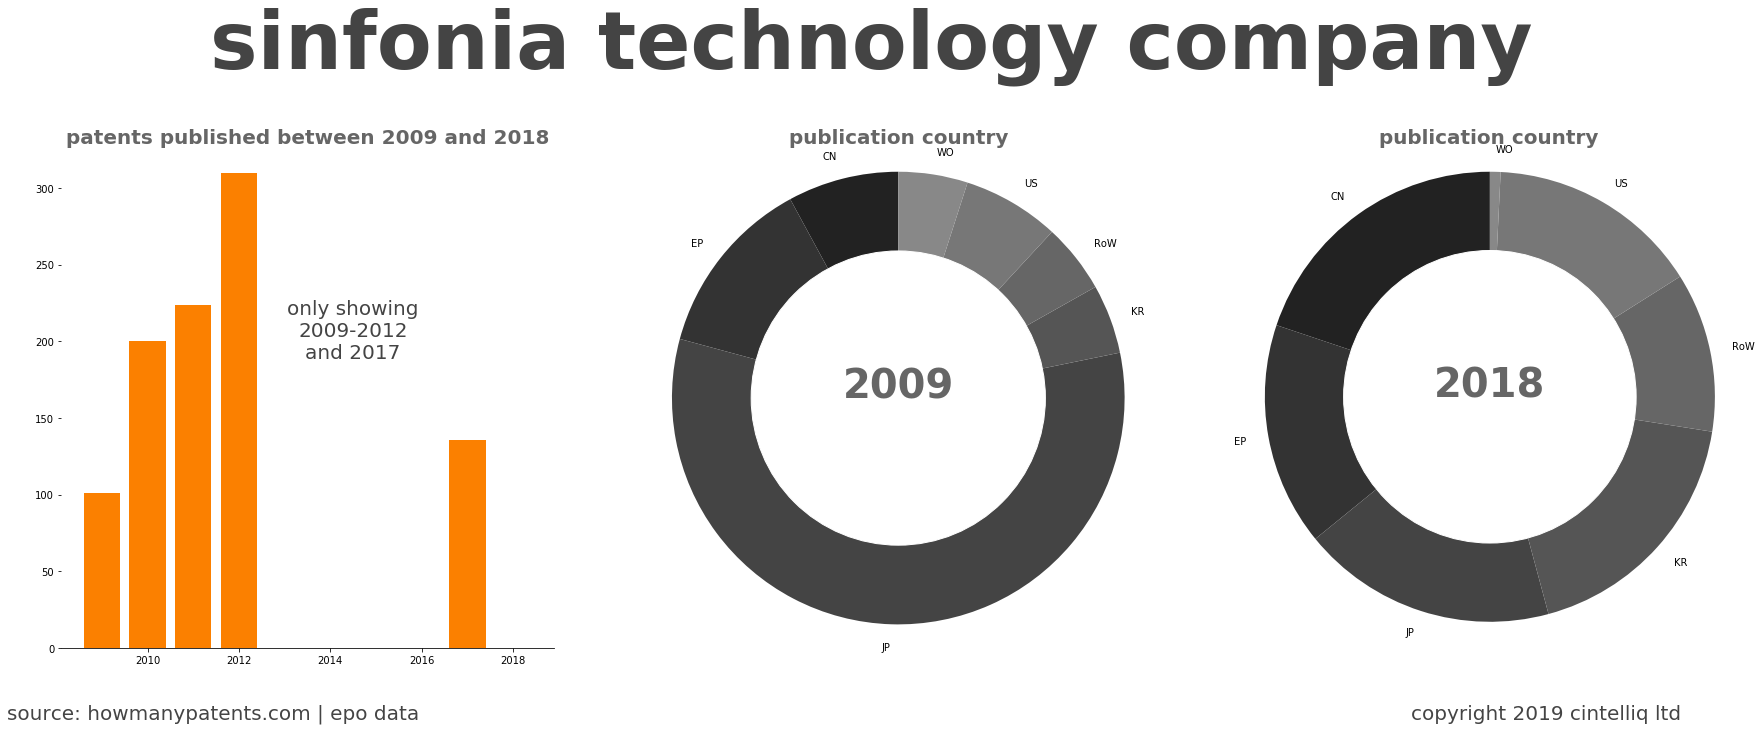 summary of patents for Sinfonia Technology Company